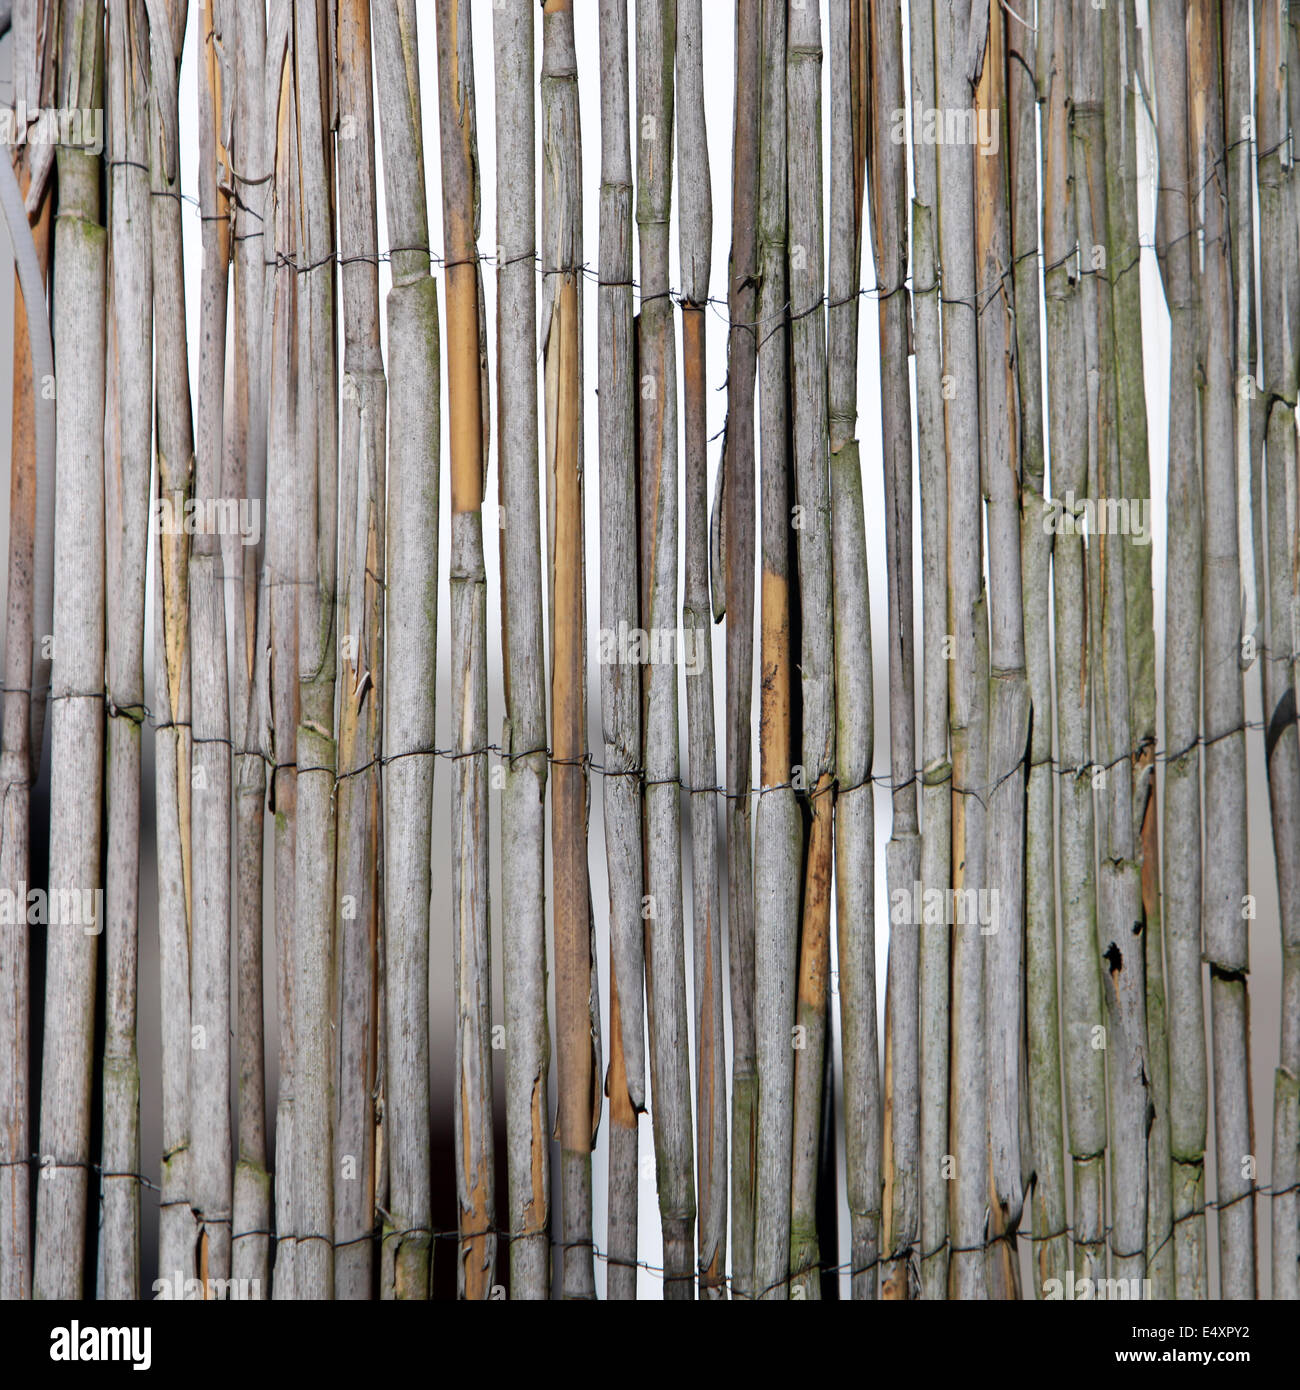 Dried bamboo fence Stock Photo